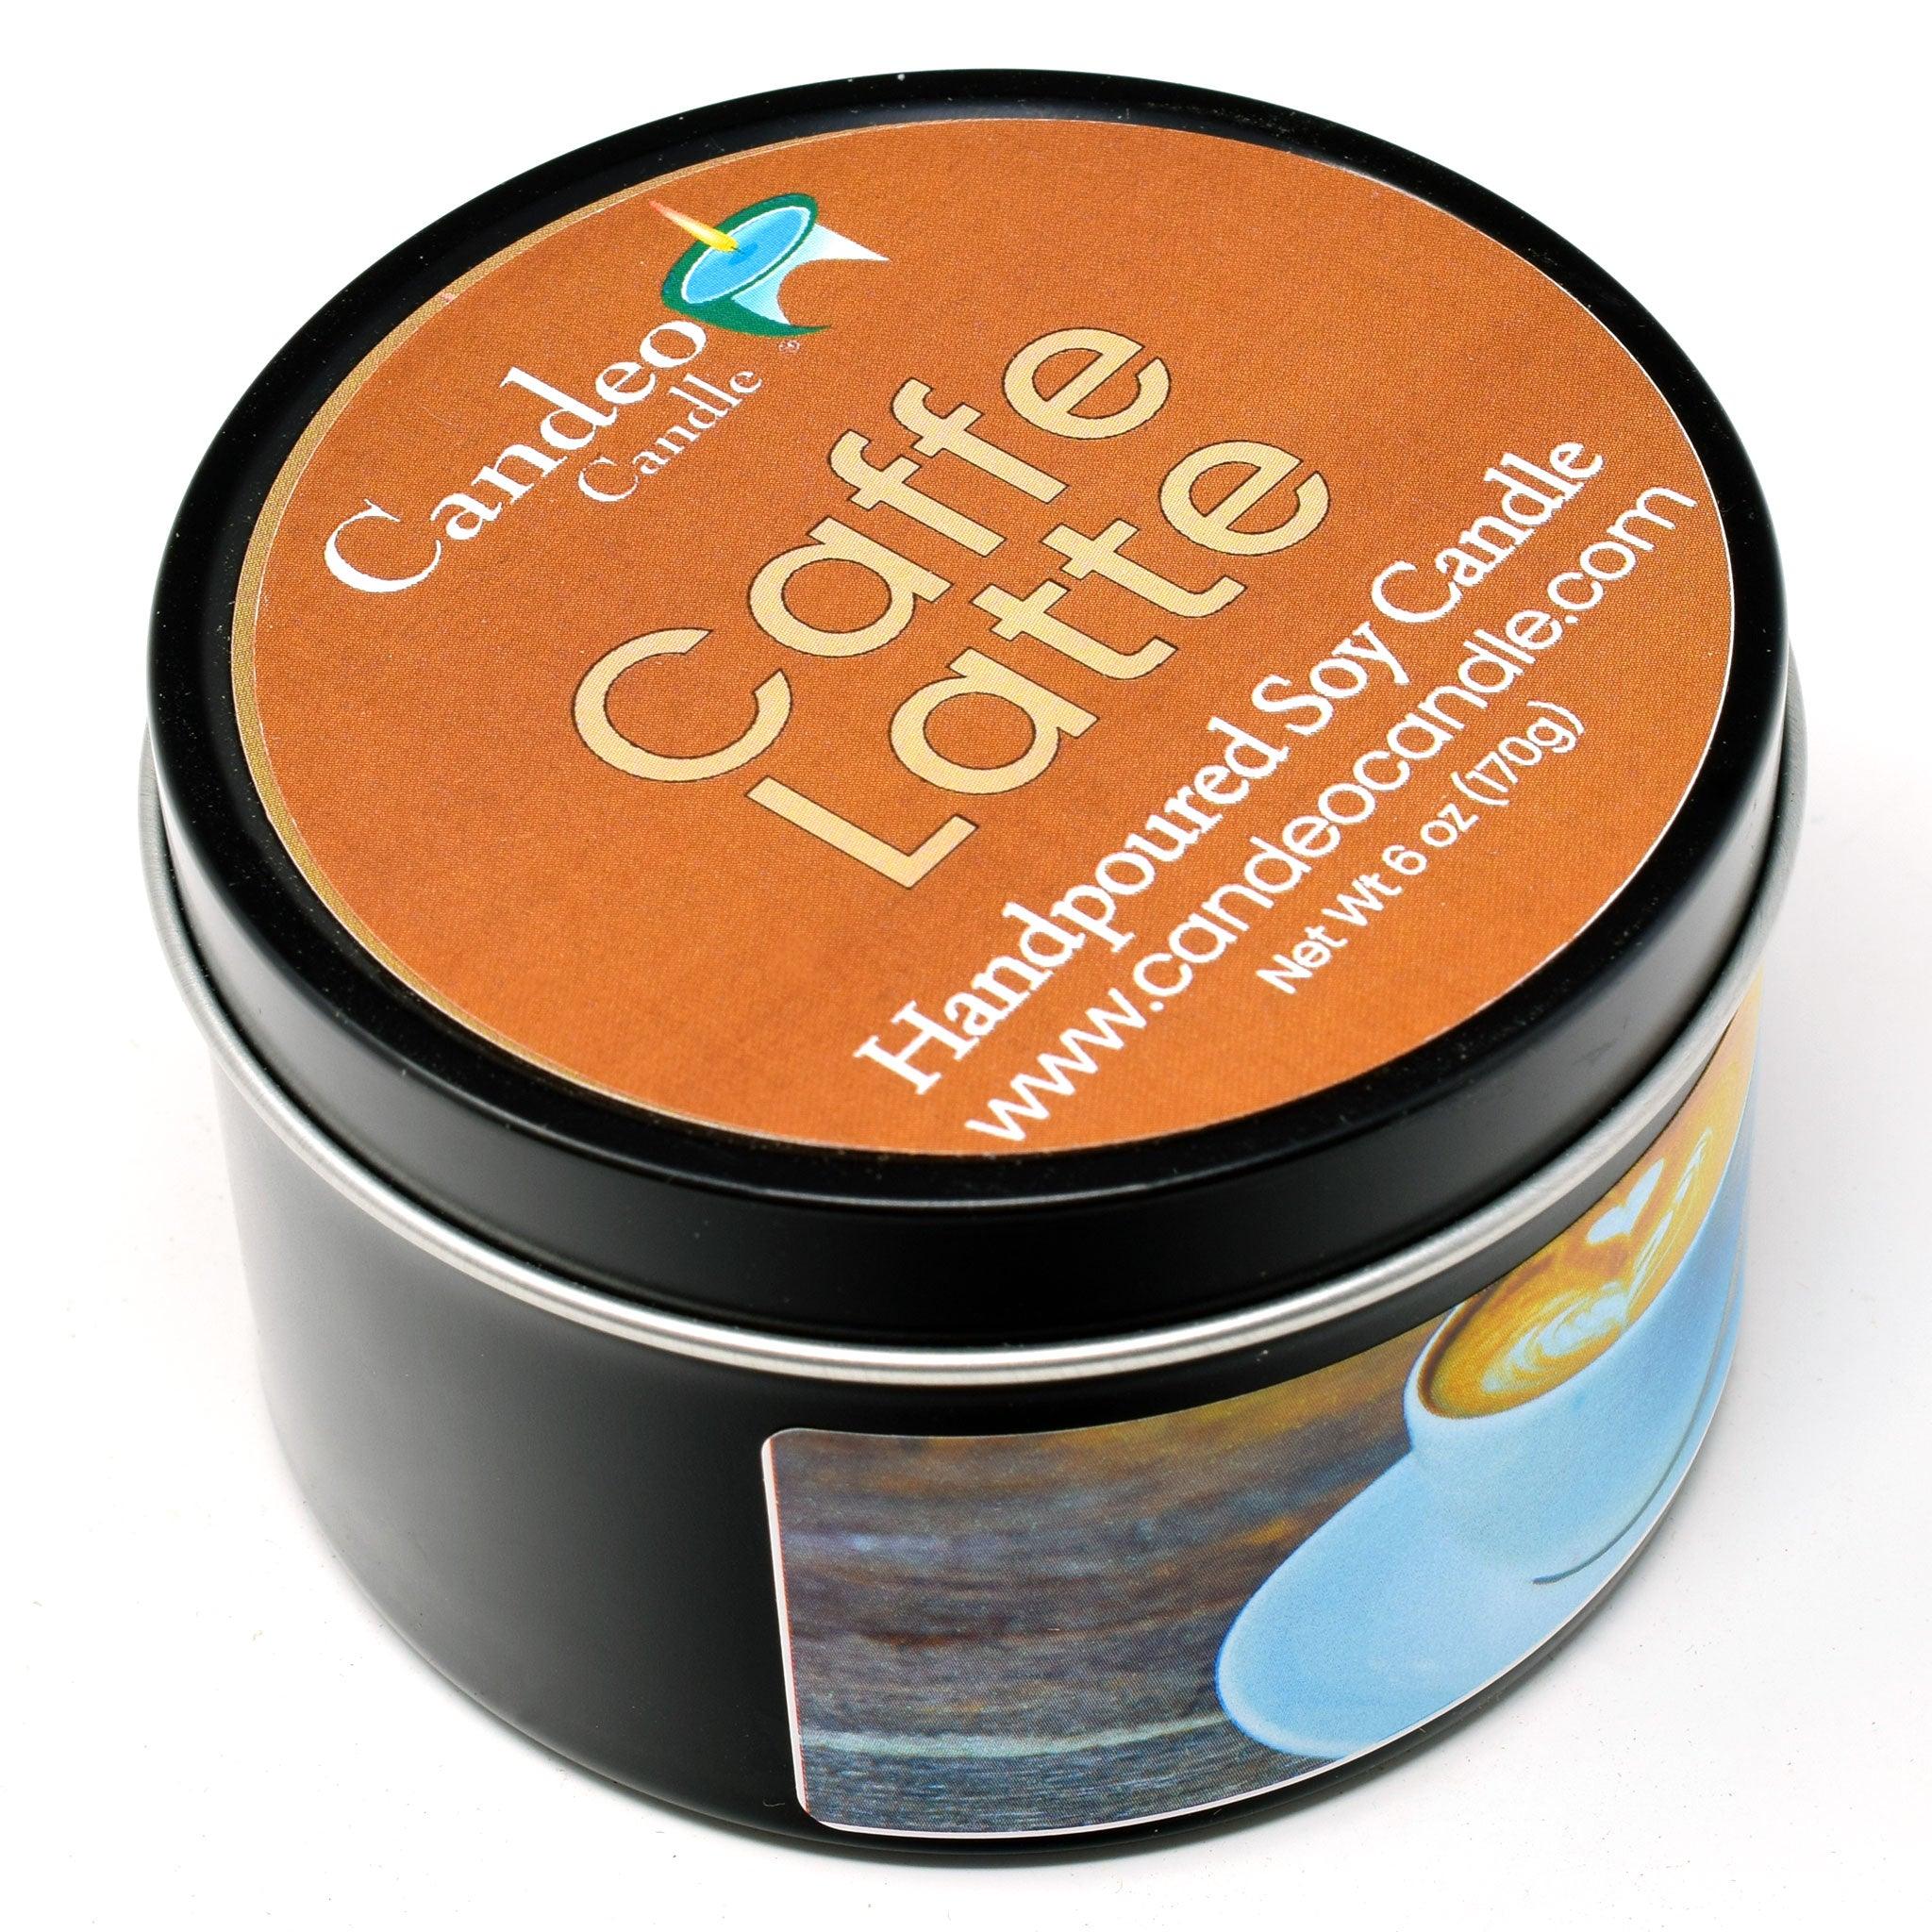 Caffe Latte, 6oz Soy Candle Tin - Candeo Candle